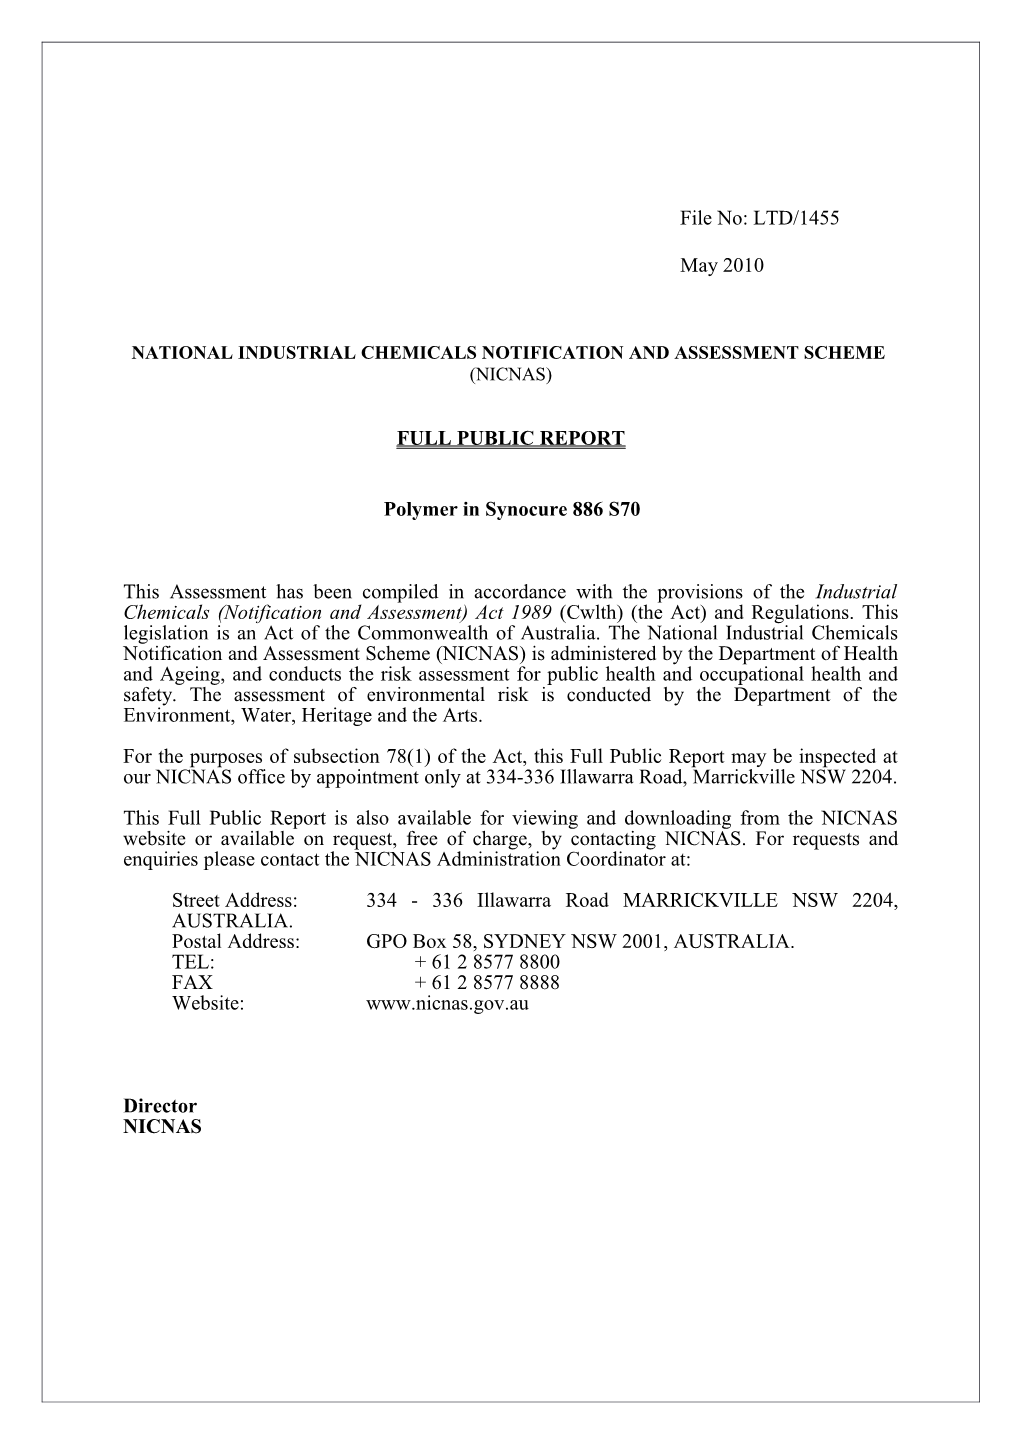 National Industrial Chemicals Notification and Assessment Scheme s33